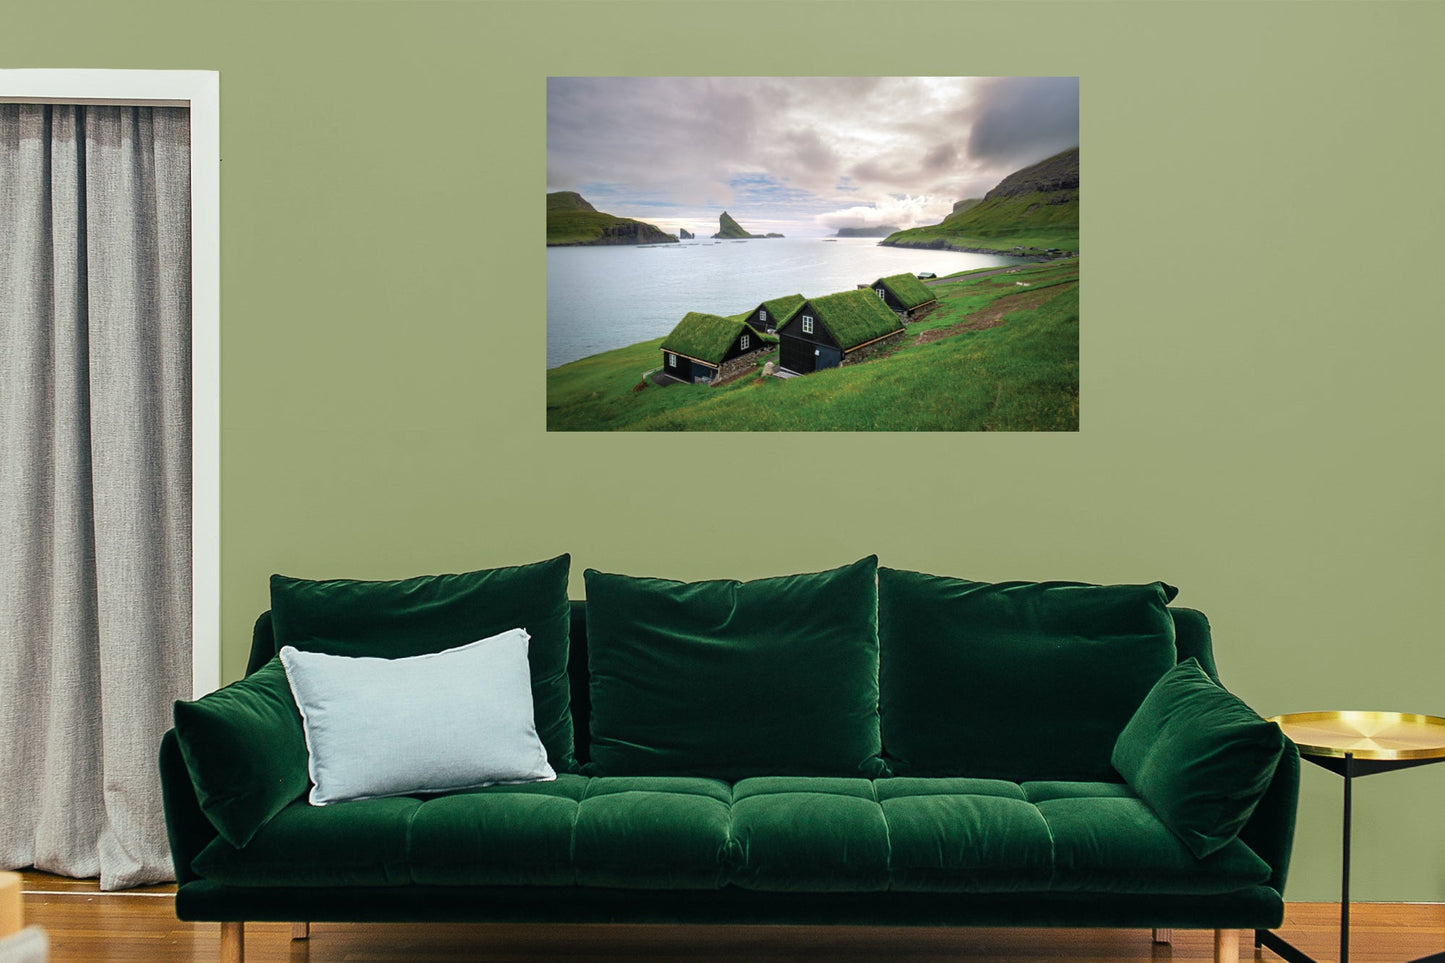 Popular Landmarks: Faroe Islands Realistic Poster - Removable Adhesive Decal